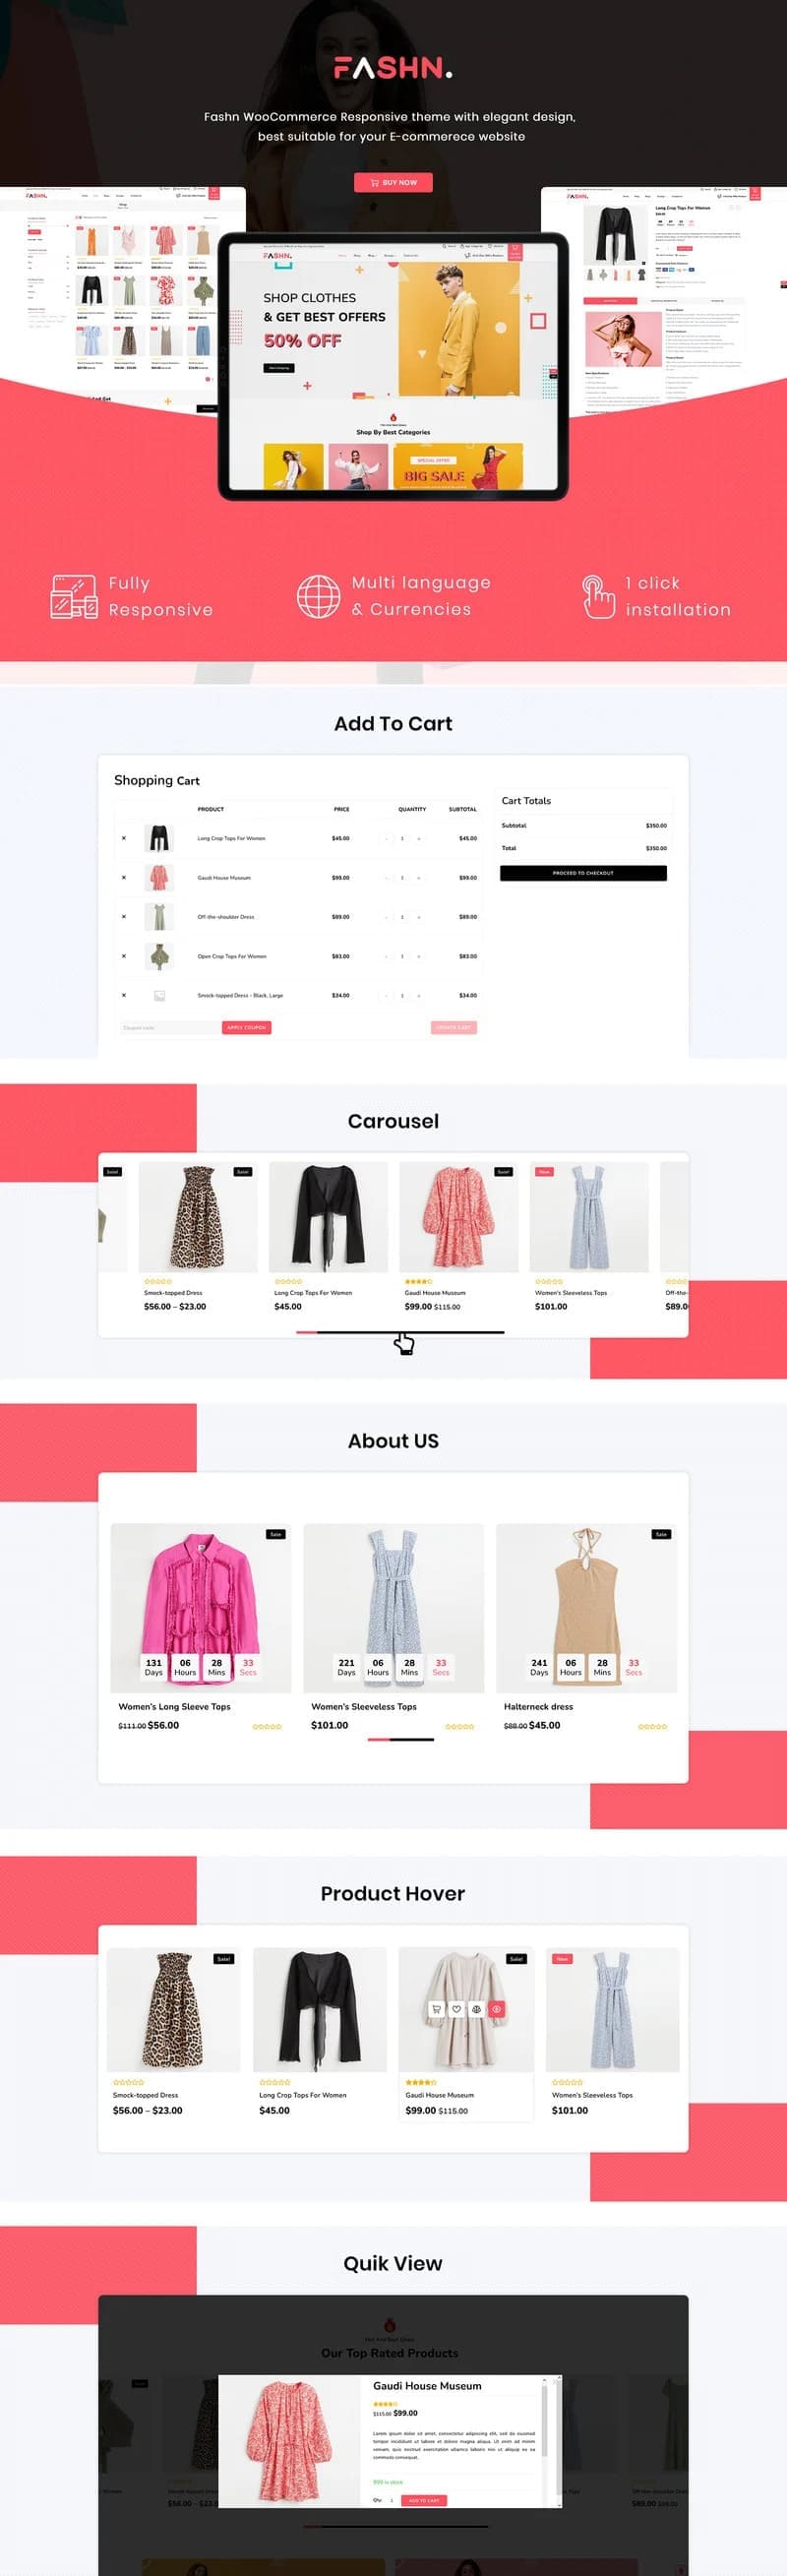 Fashn WooCommerce Responsive theme with elegant design, best suitable for your E-commerece Website.